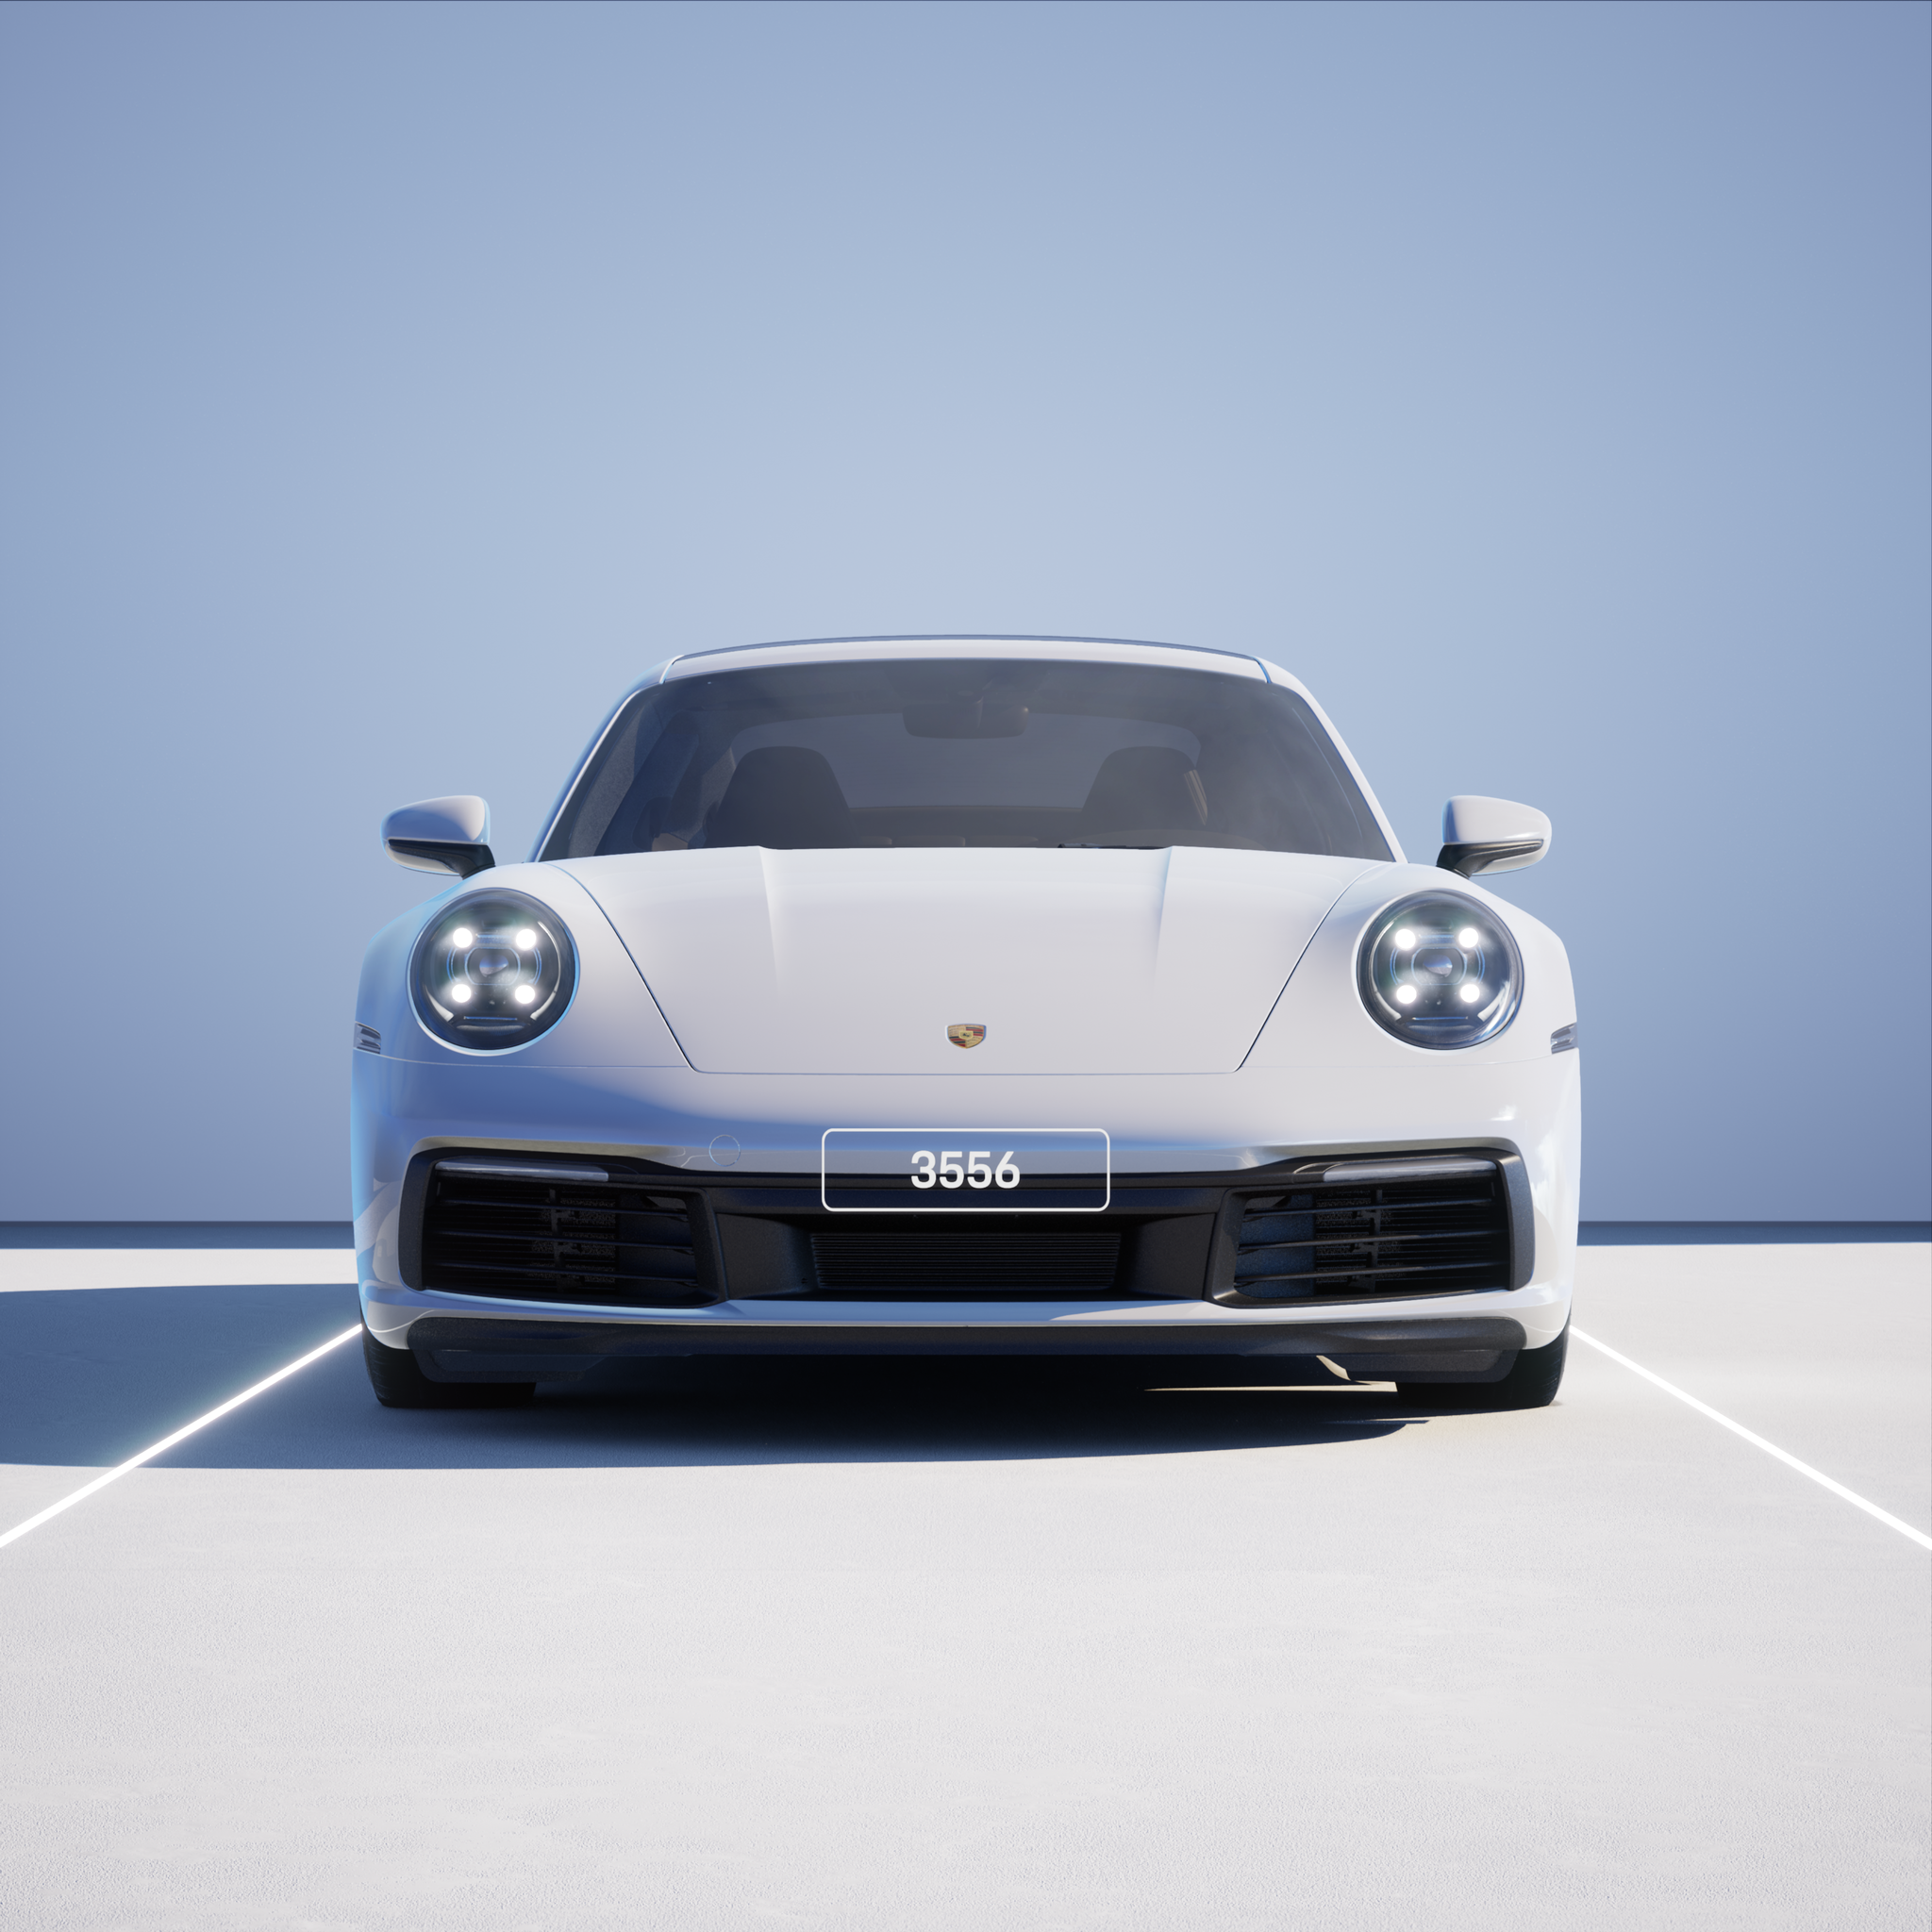 The PORSCHΞ 911 3556 image in phase